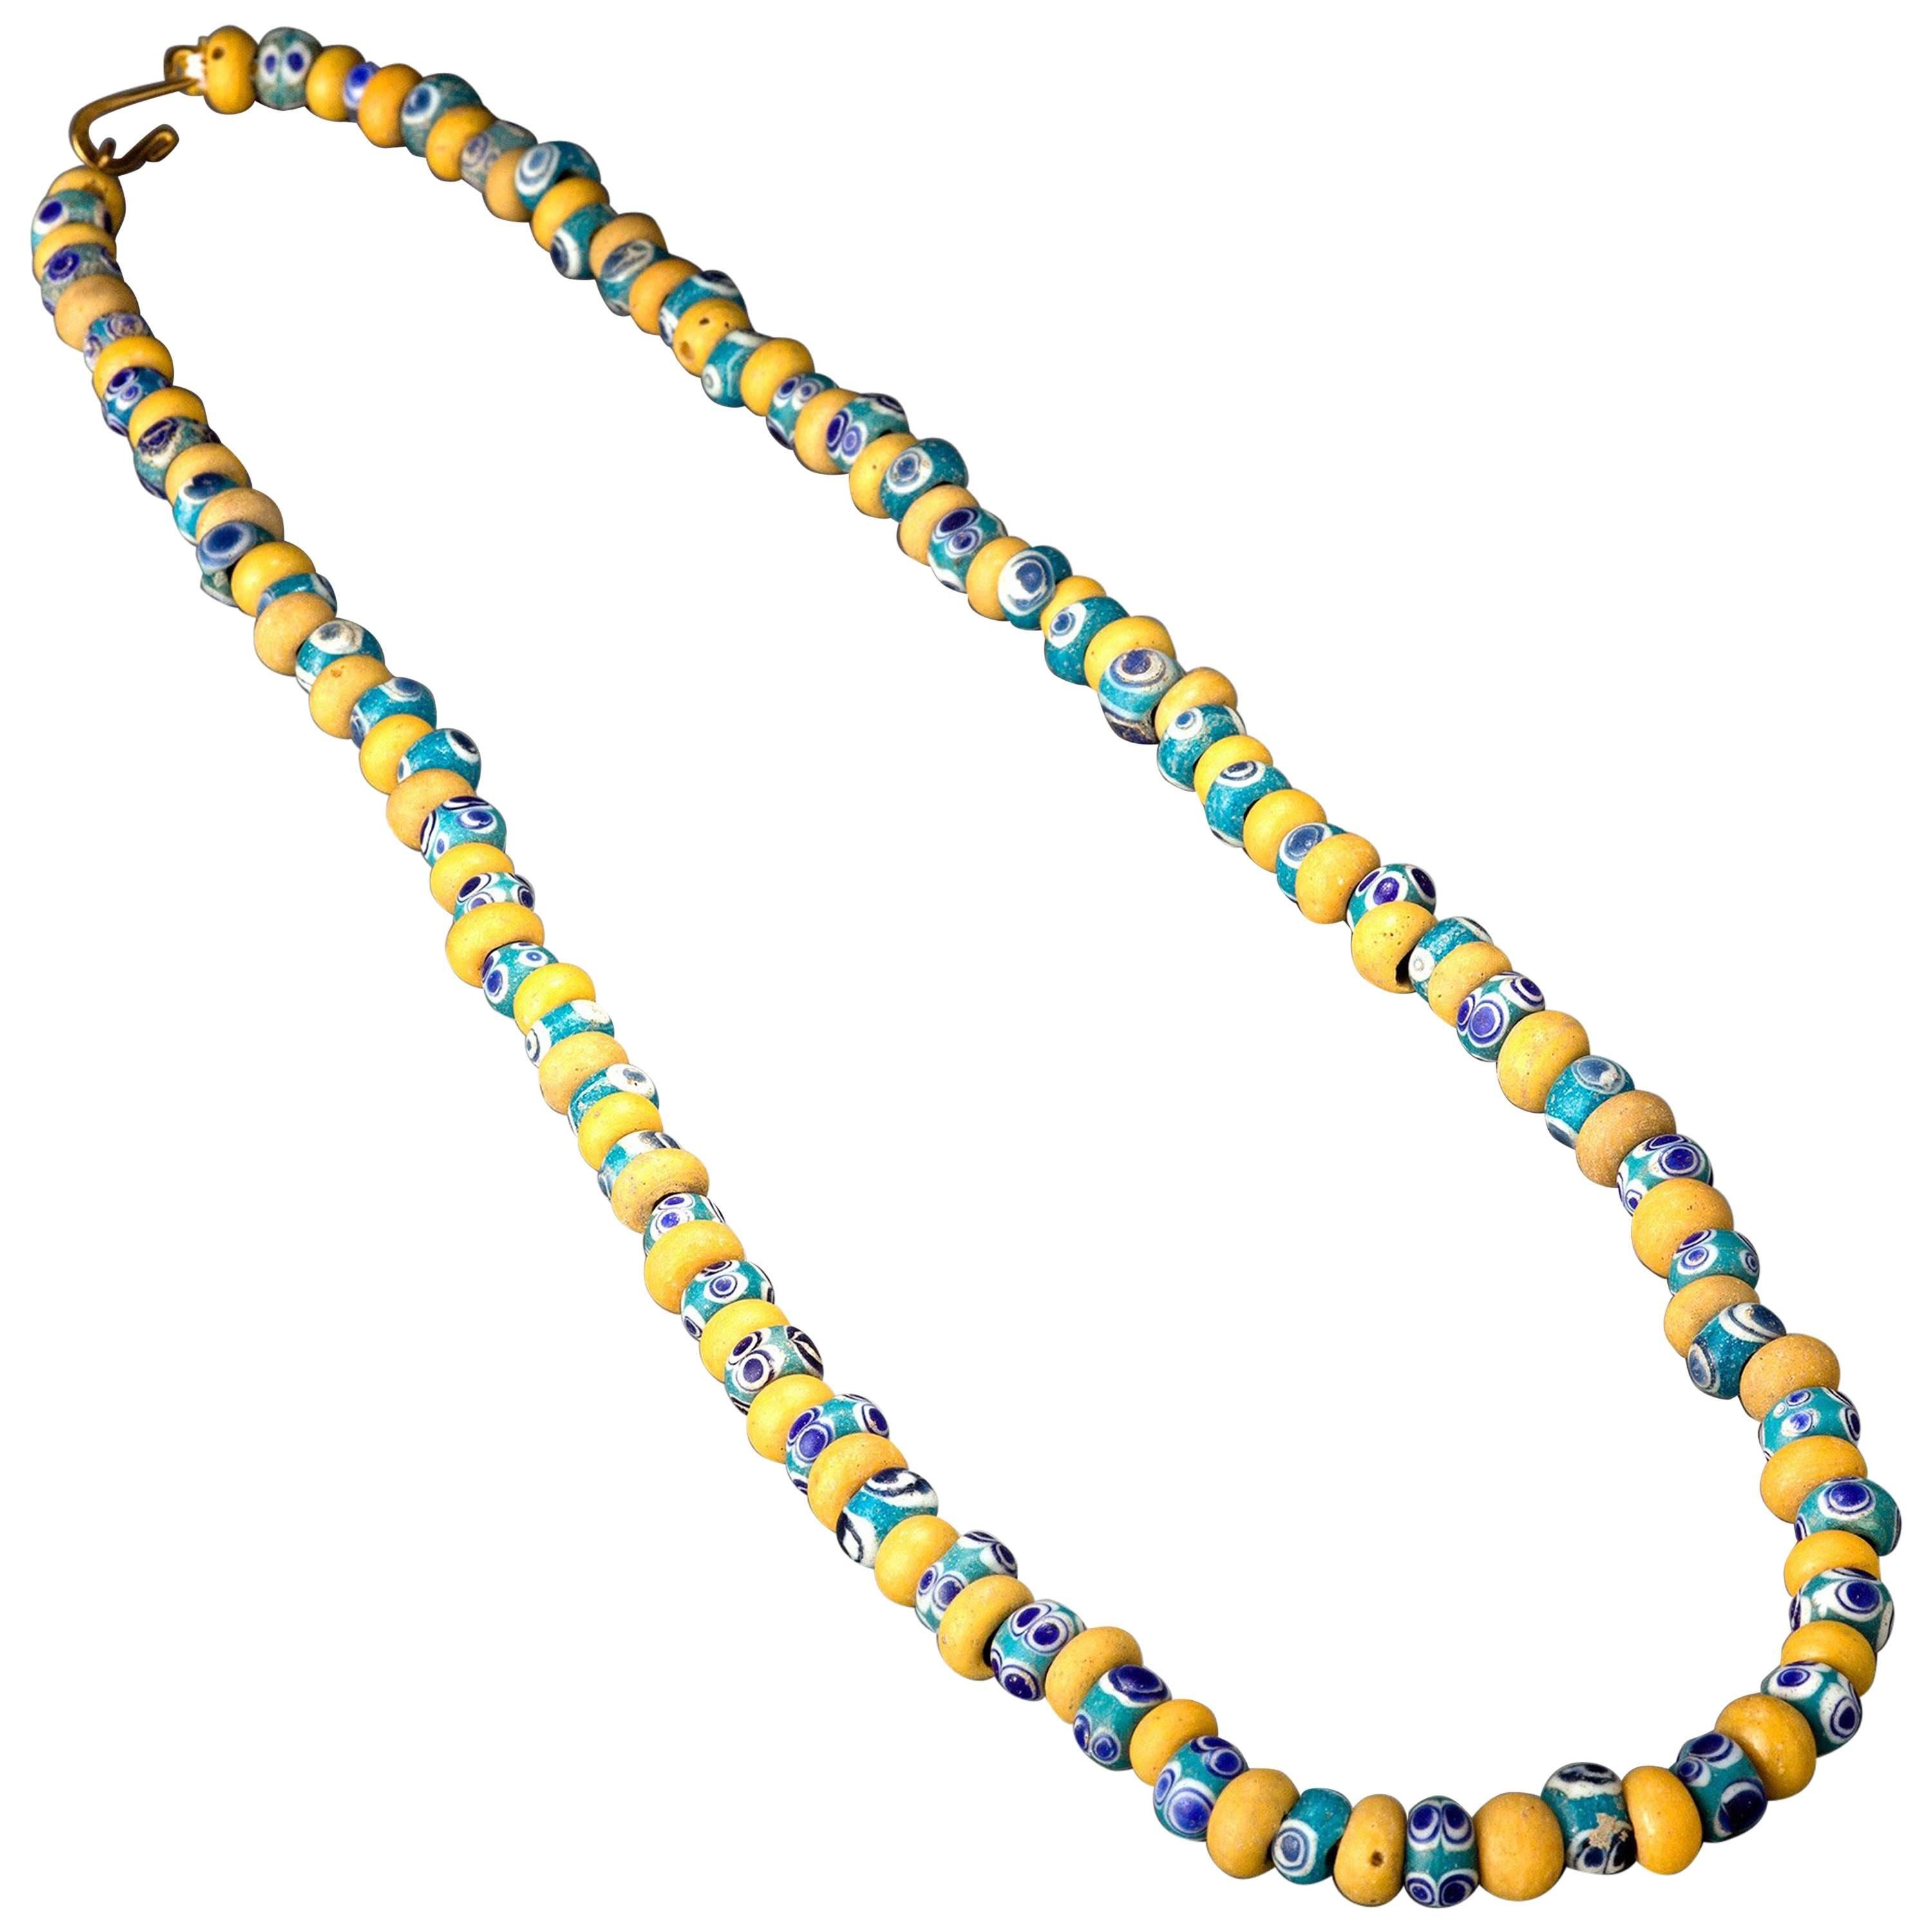 Ancient Phoenician Glass Eye Beads Necklace, Ancient Jewelry For Sale